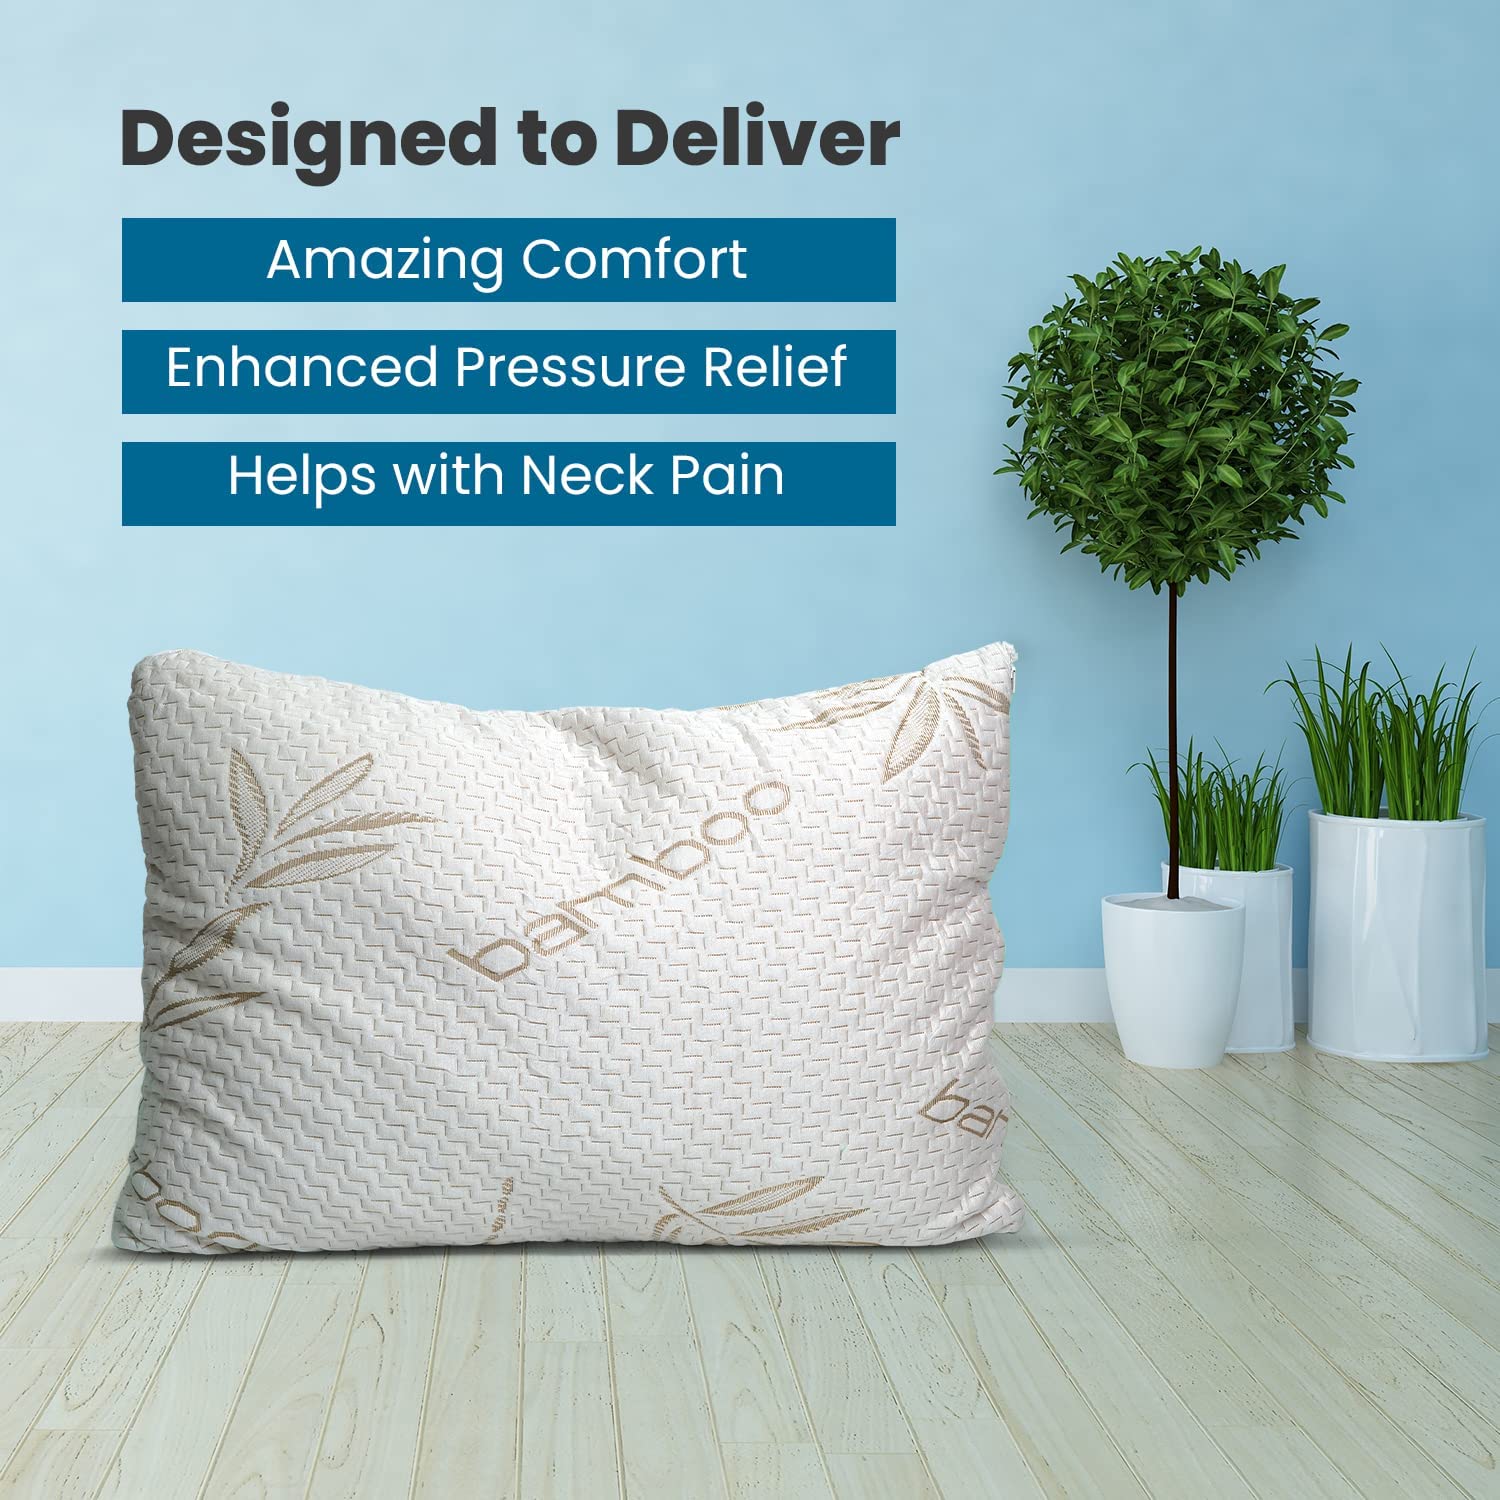 Best Selling Bamboo Pillow on Amazon